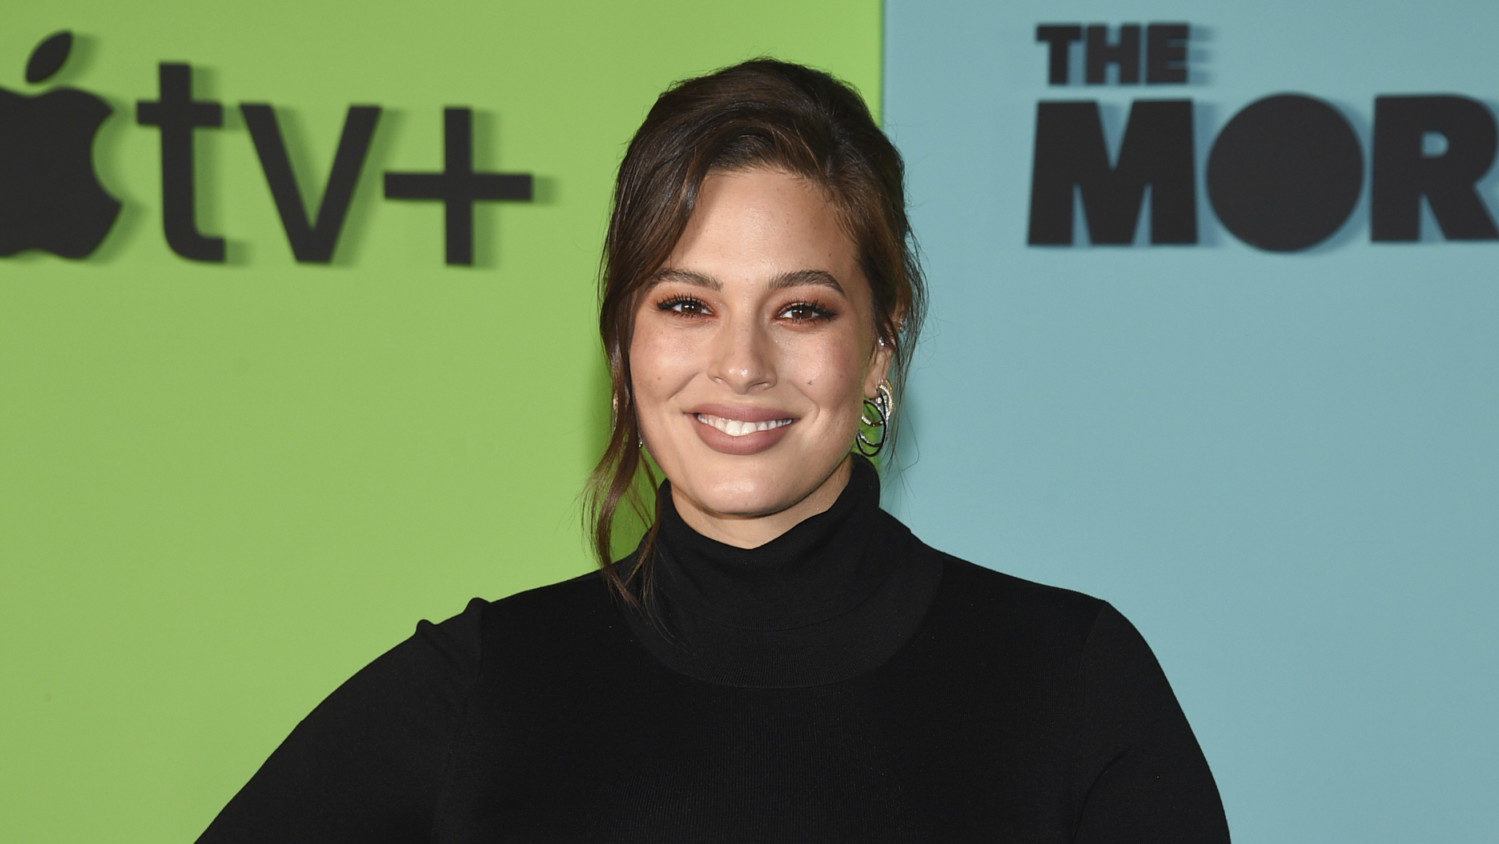 Ashley Graham at world premiere of Apple TV+'s "The Morning Show" in New York.